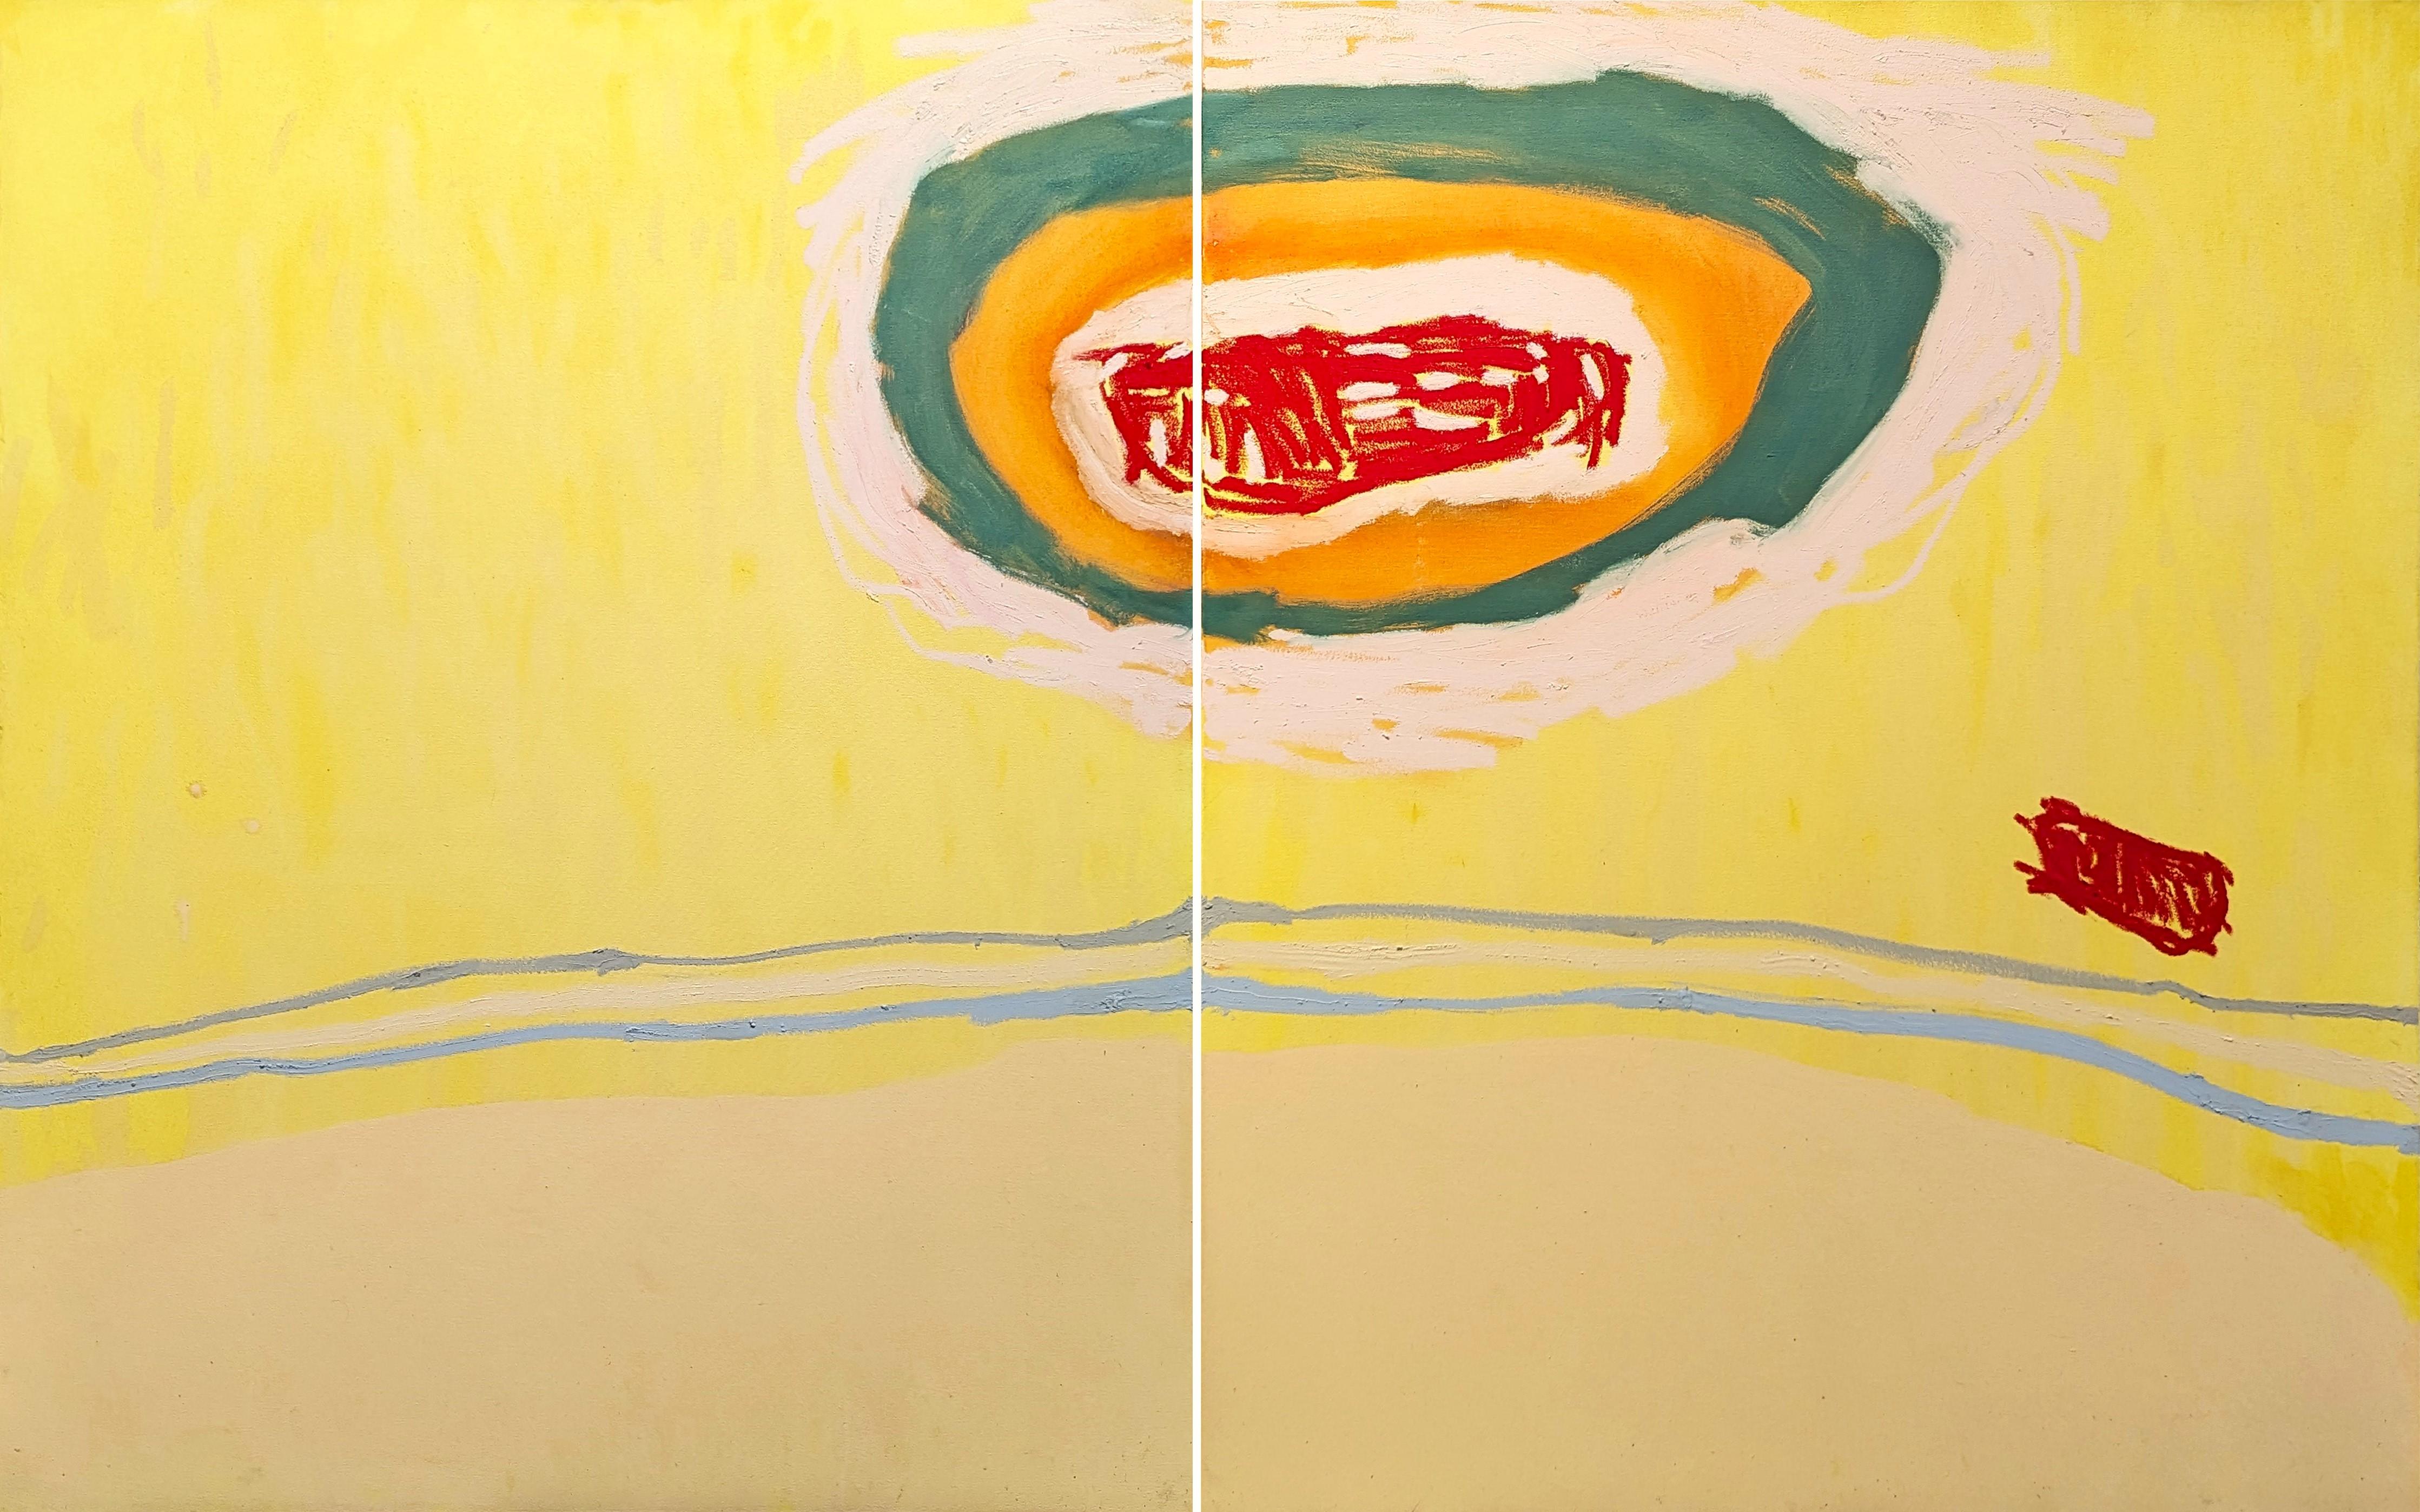 Benji Stiles Abstract Painting - "Mars Rising Over Flesh" Contemporary Yellow & Green Abstract Diptych Painting